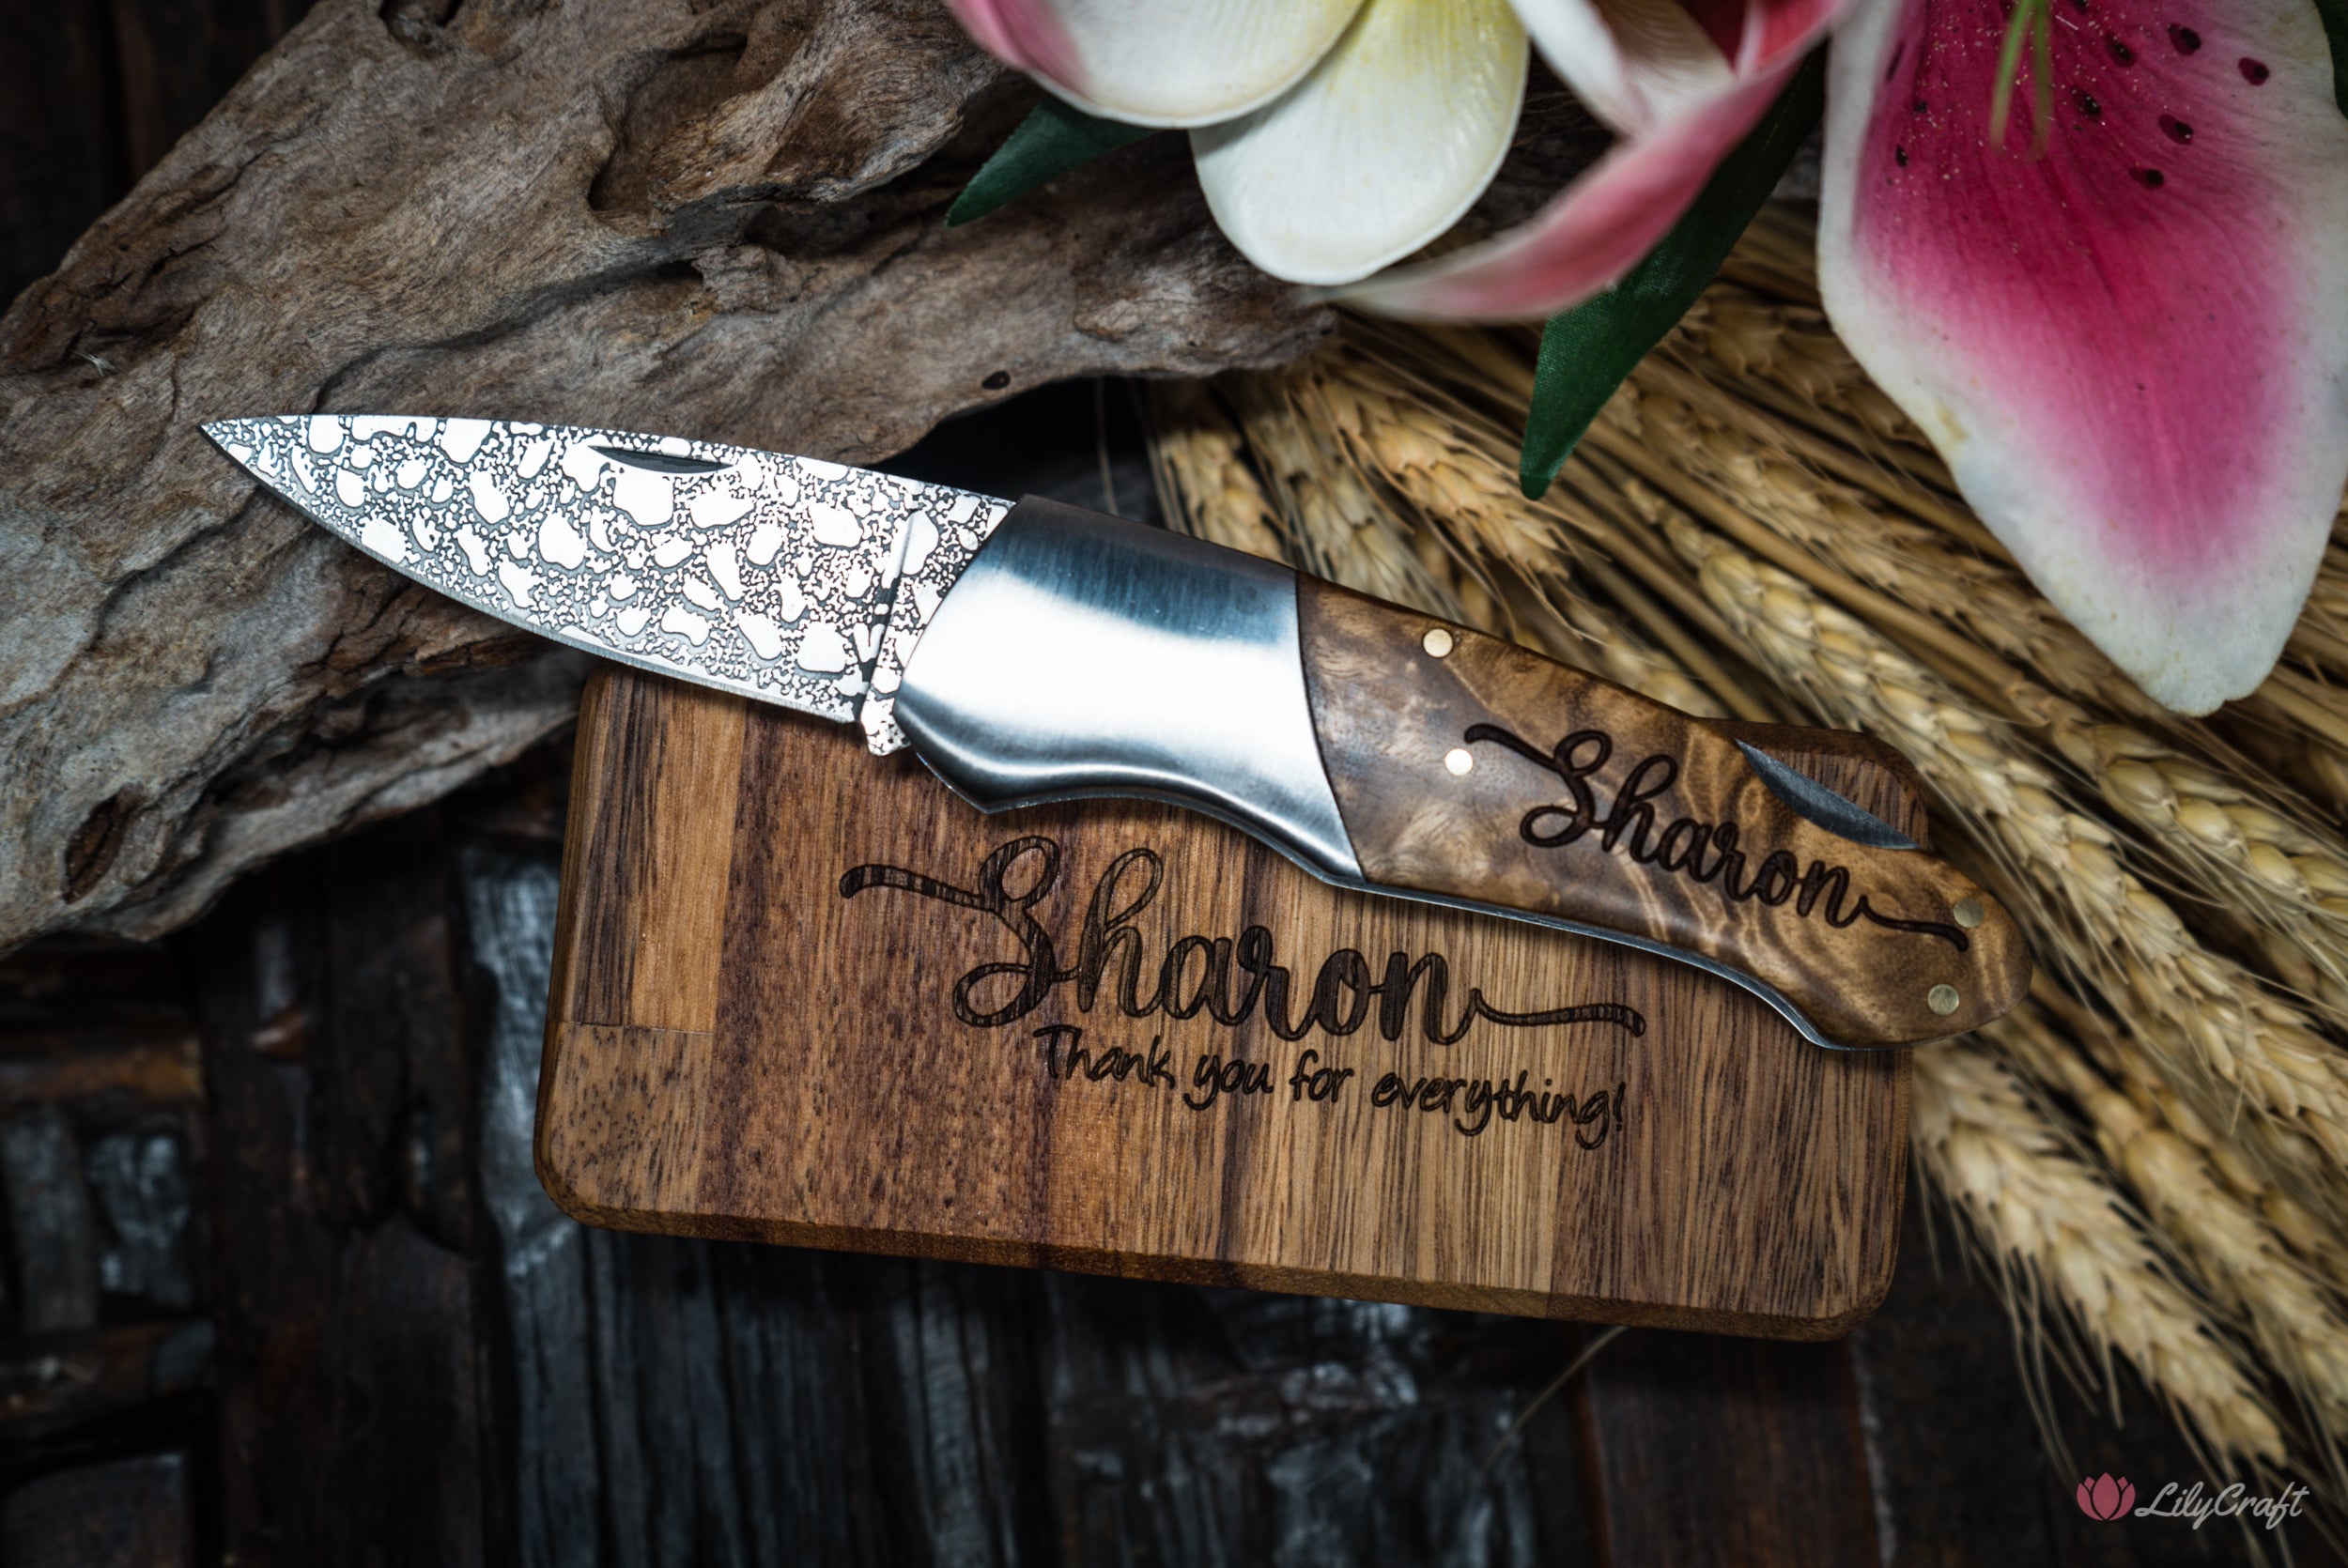 Personalized pocket knife with engraved name on handle